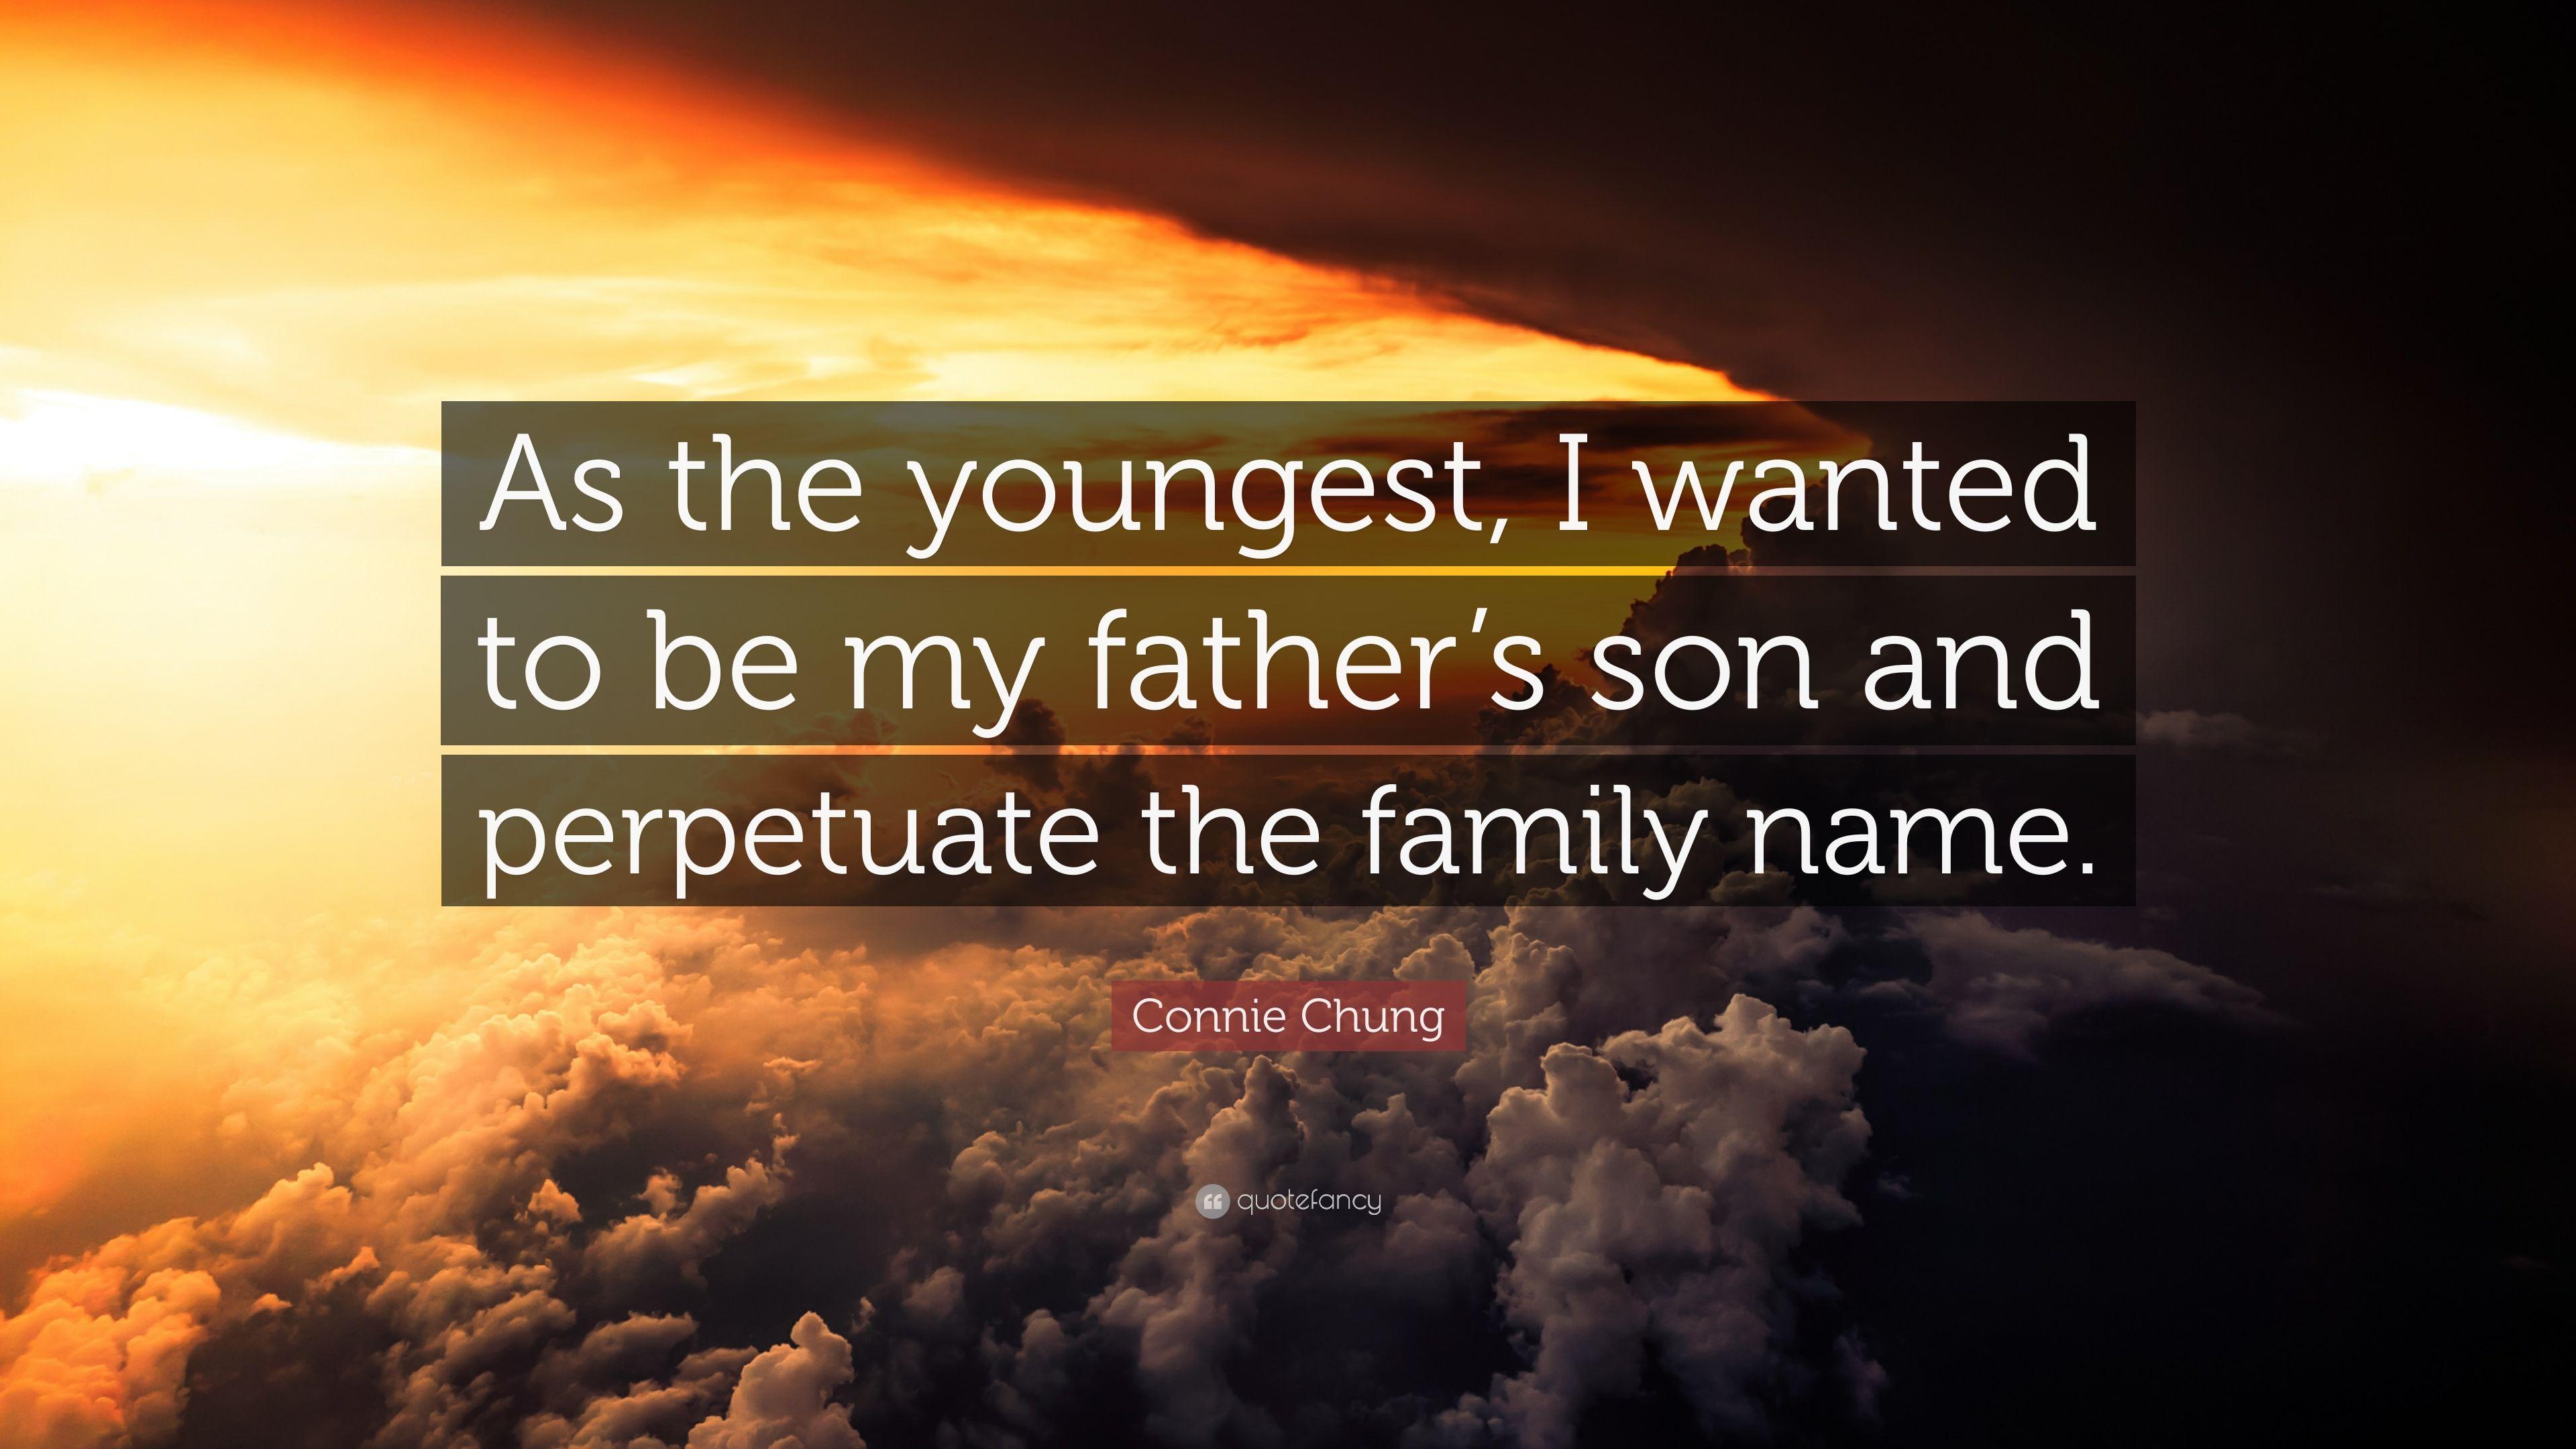 Connie Chung Quote: “As the youngest, I wanted to be my father's son